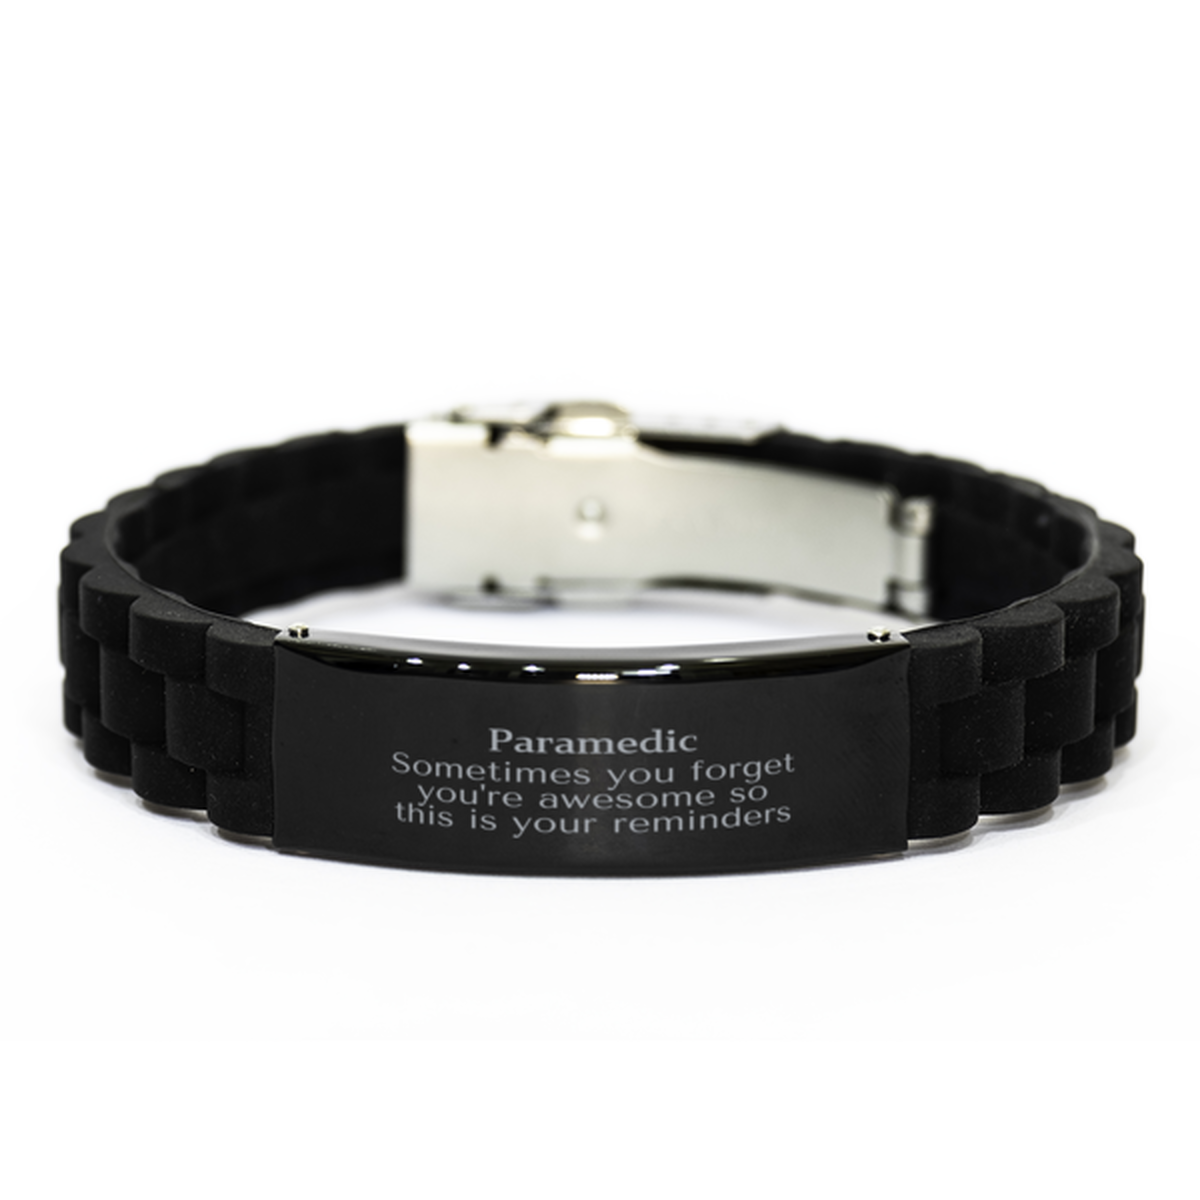 Sentimental Paramedic Black Glidelock Clasp Bracelet, Paramedic Sometimes you forget you're awesome so this is your reminders, Graduation Christmas Birthday Gifts for Paramedic, Men, Women, Coworkers